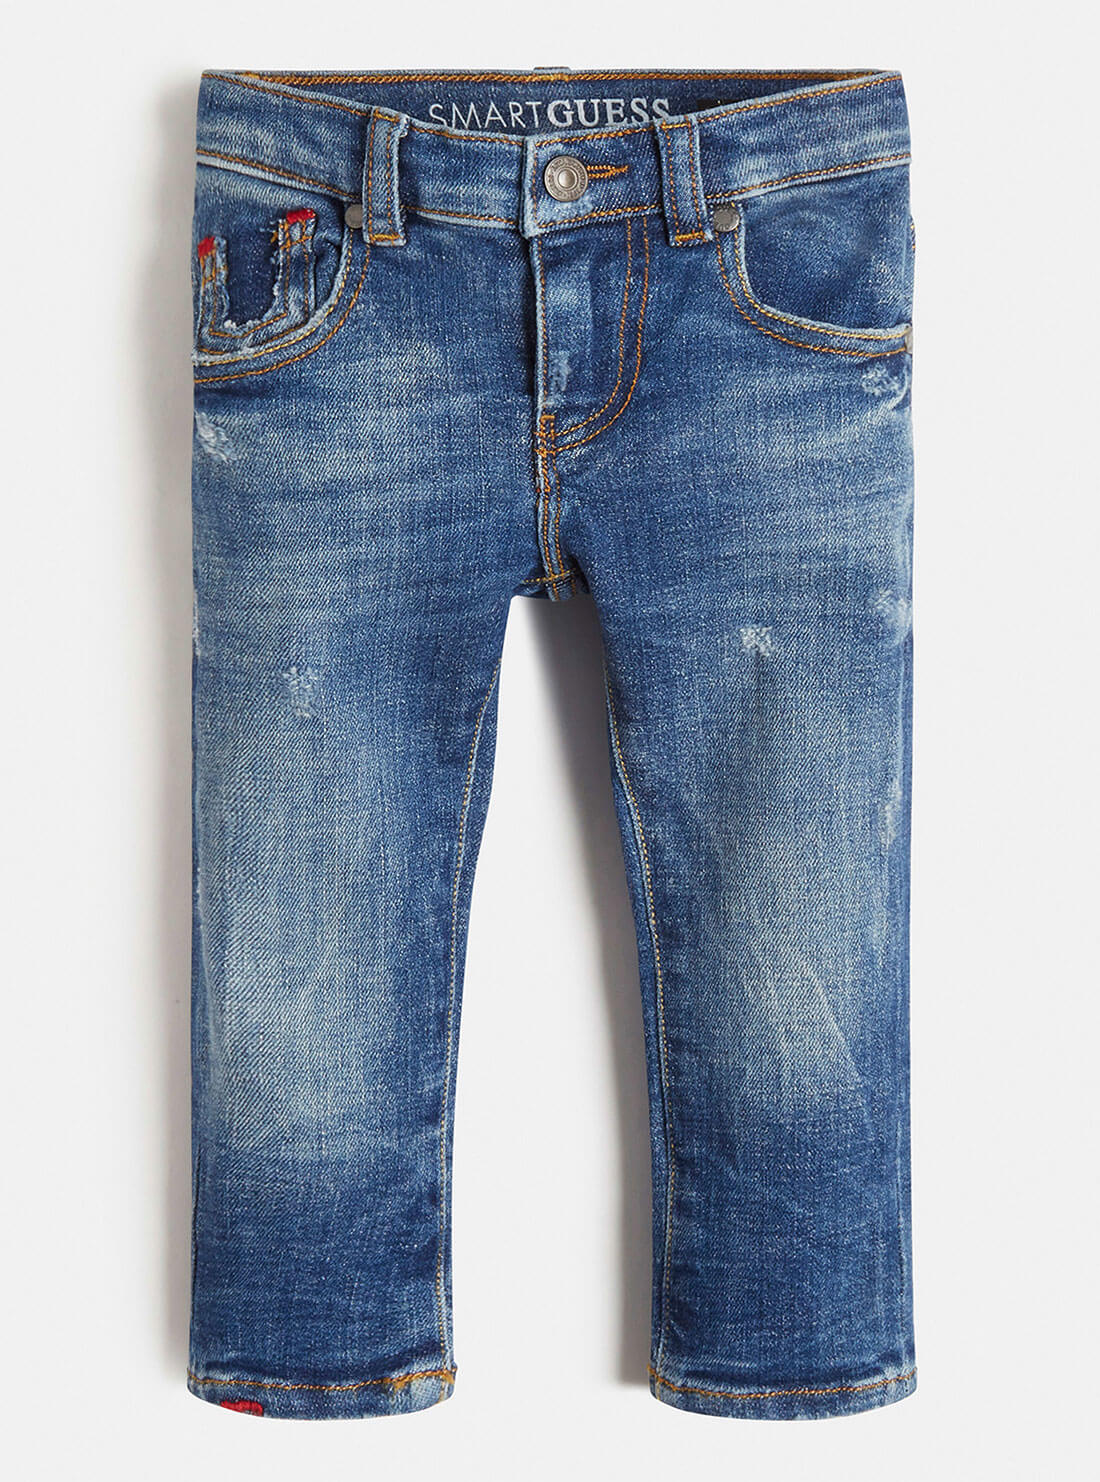 GUESS Little Boys Mini Me Skinny Denim Jeans in Mid-Wash (2-7) N1RA14D46A0  Front View